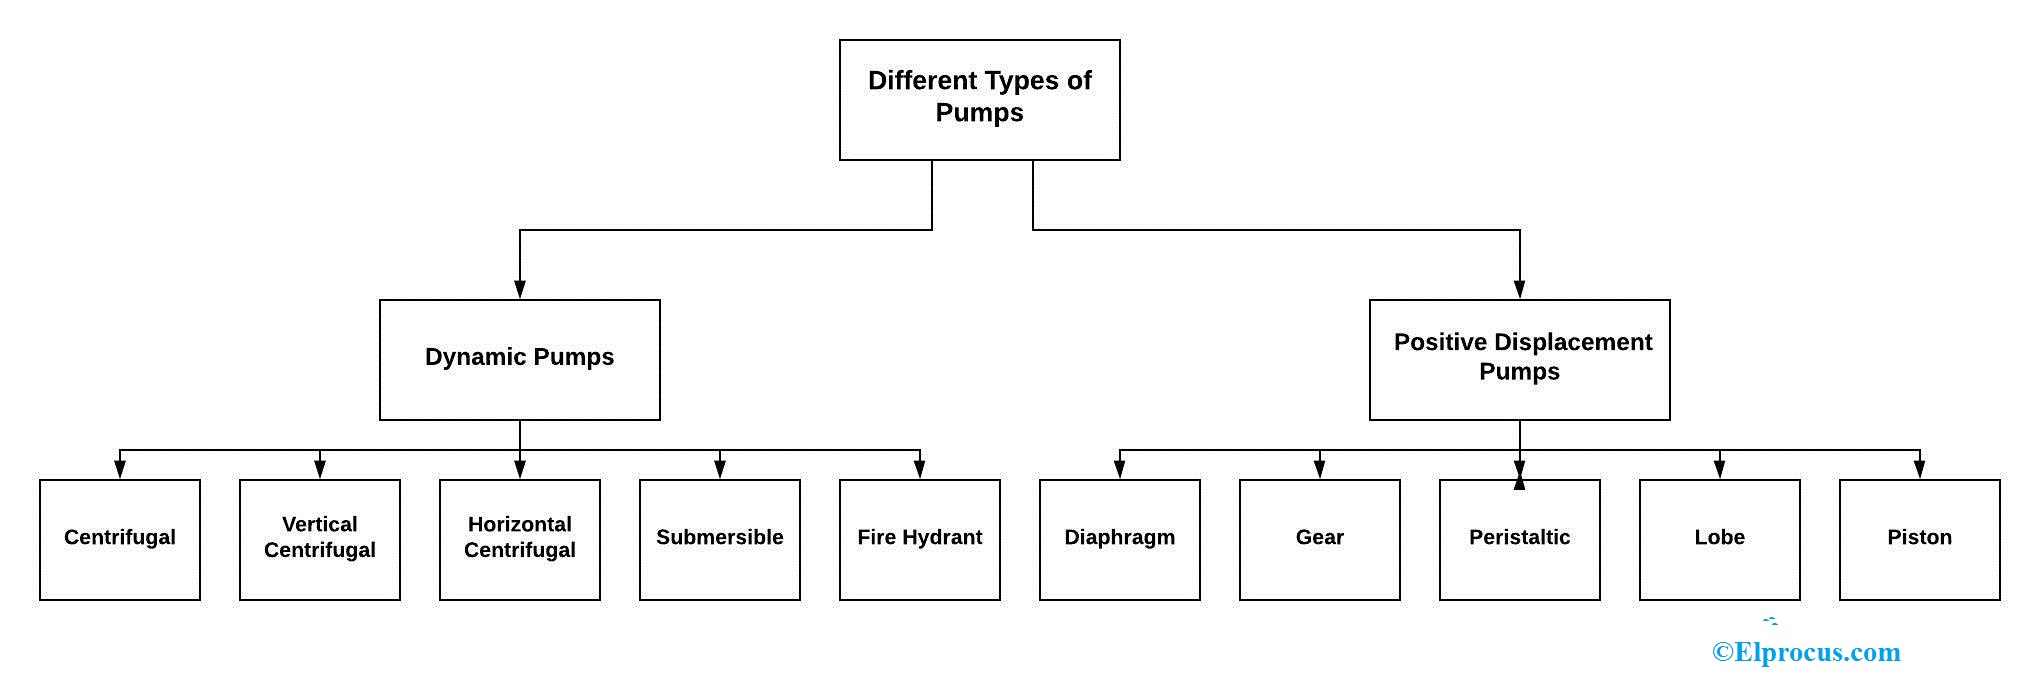 Different Types of Pumps: Working & Their Applications